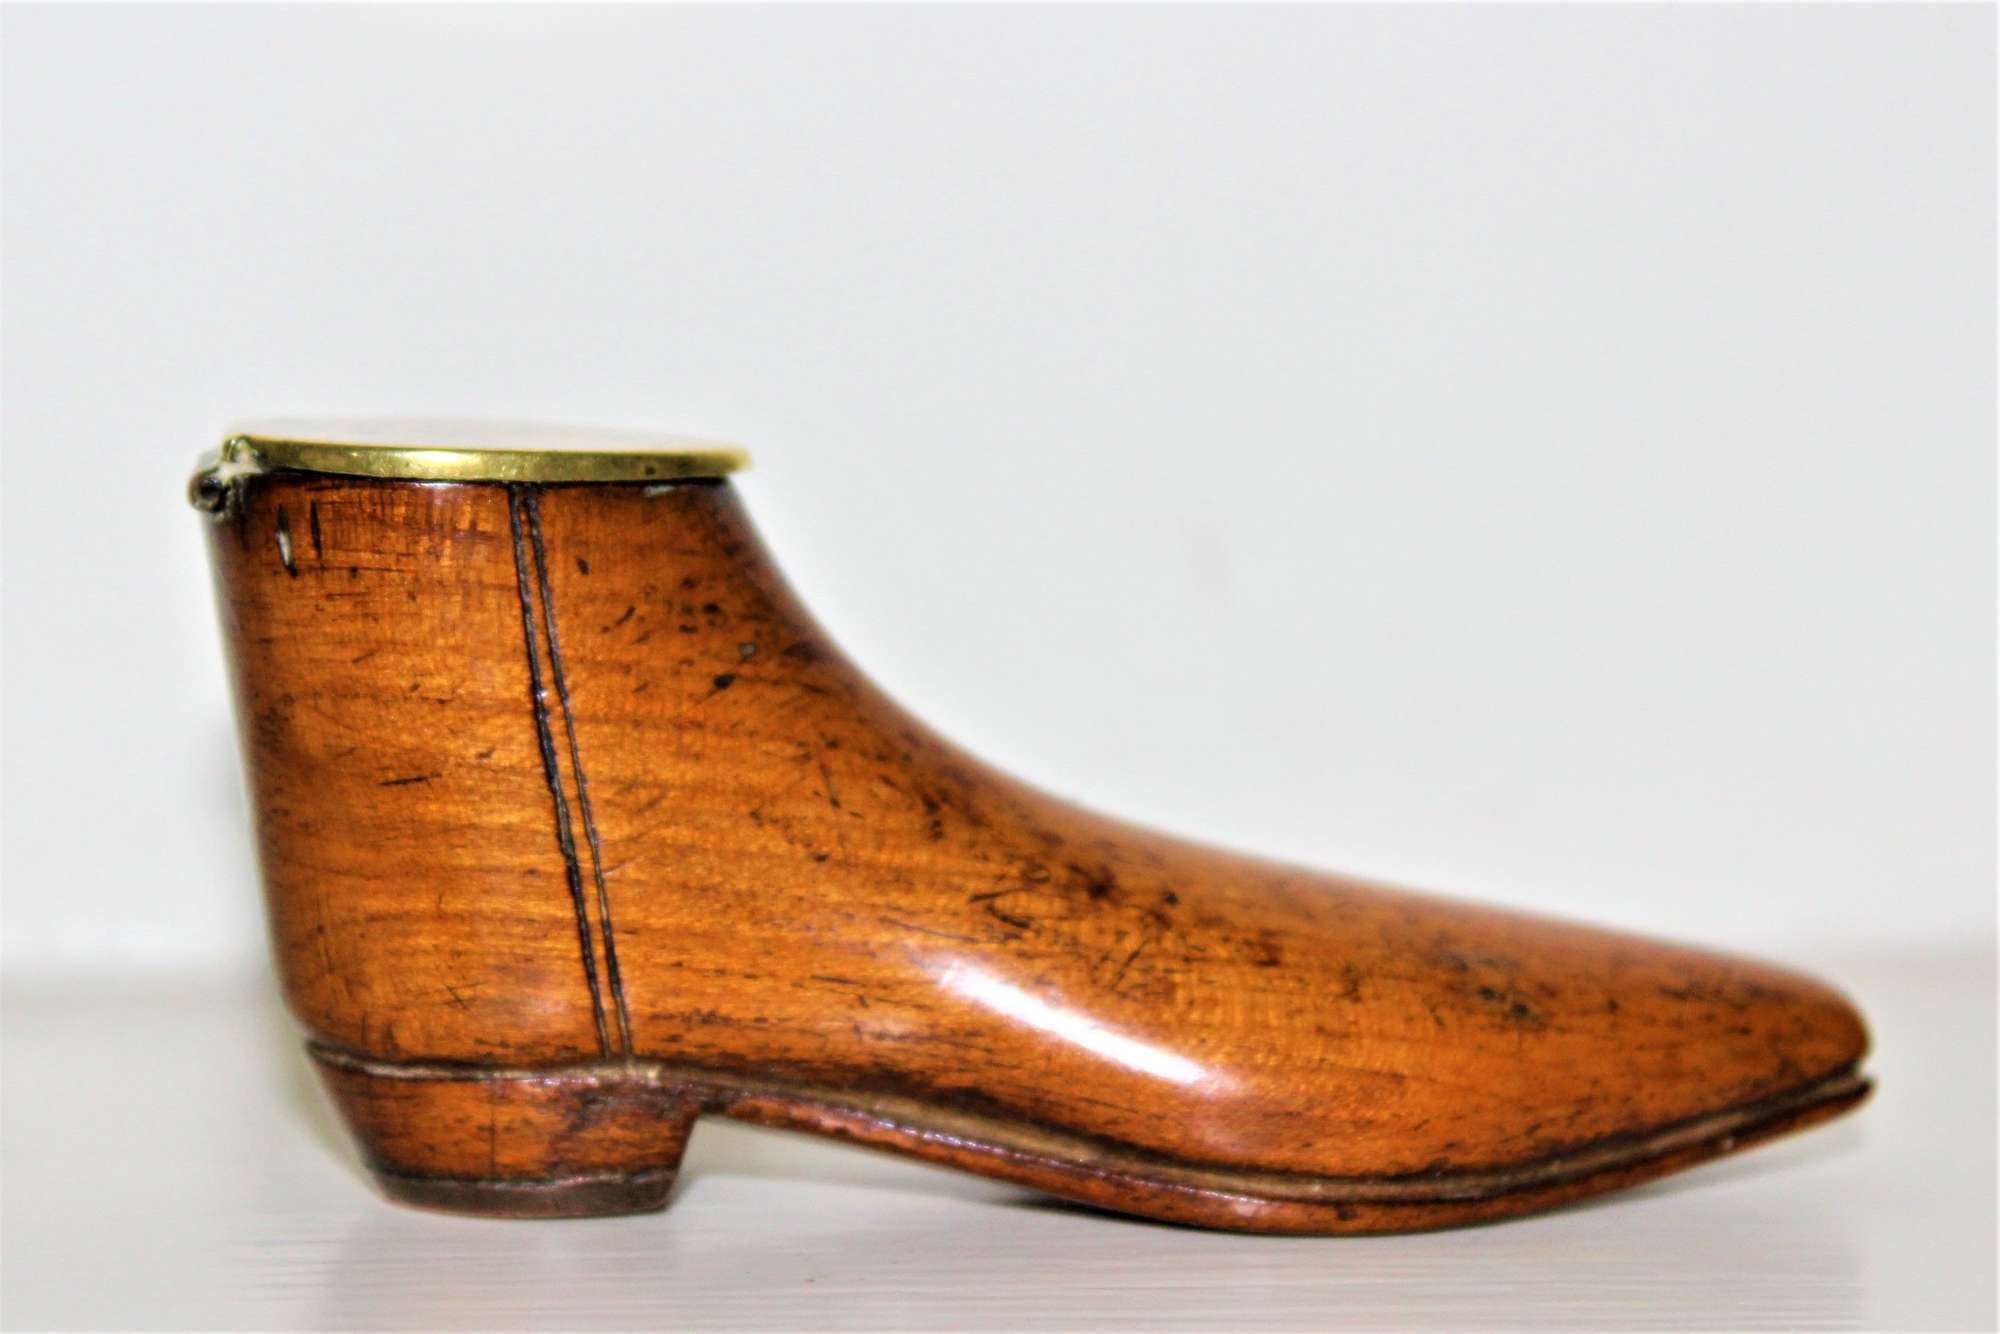 A Fine And Tactile Georgian Pocket Snuff Box In The Shape Of A Shoe